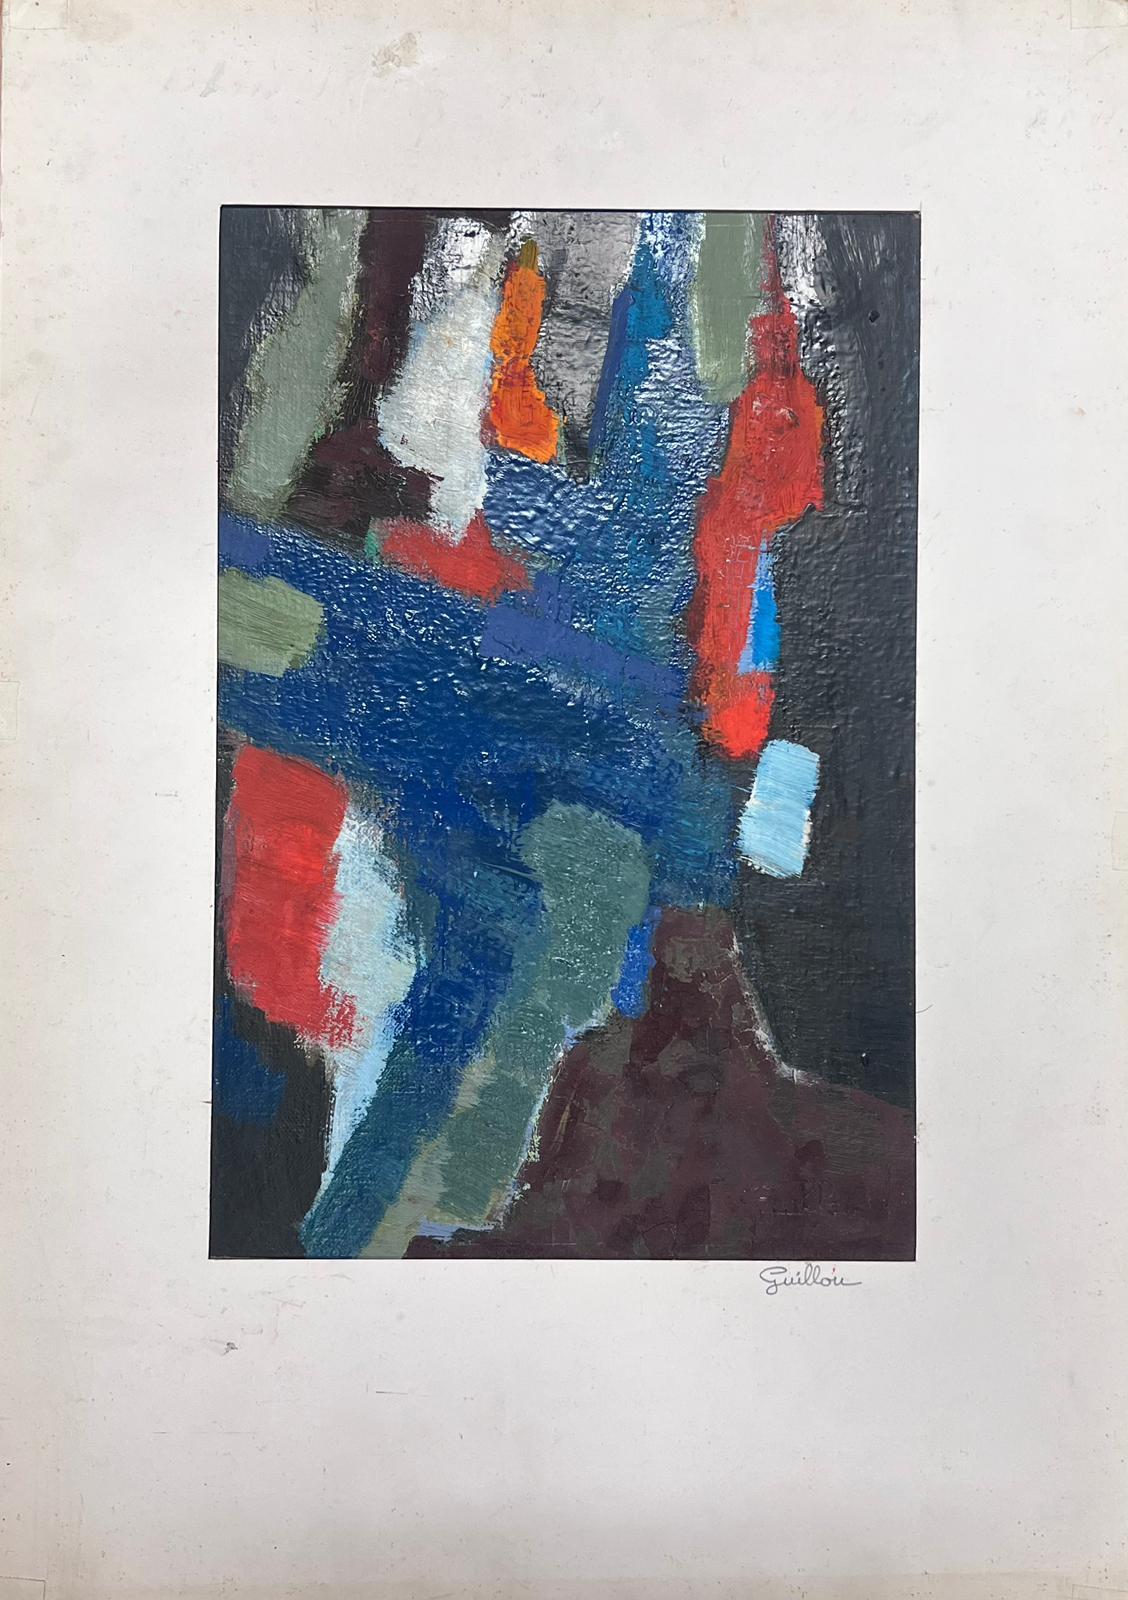 Abstract Expressionist composition
by Andre Guillou (French 1925-2017)
signed oil on board stuck on board, mounted
mount: 20.75 x 14.5 inches
board: 13.5 x 9 inches
provenance: the artists estate, France
condition: very good and sound condition